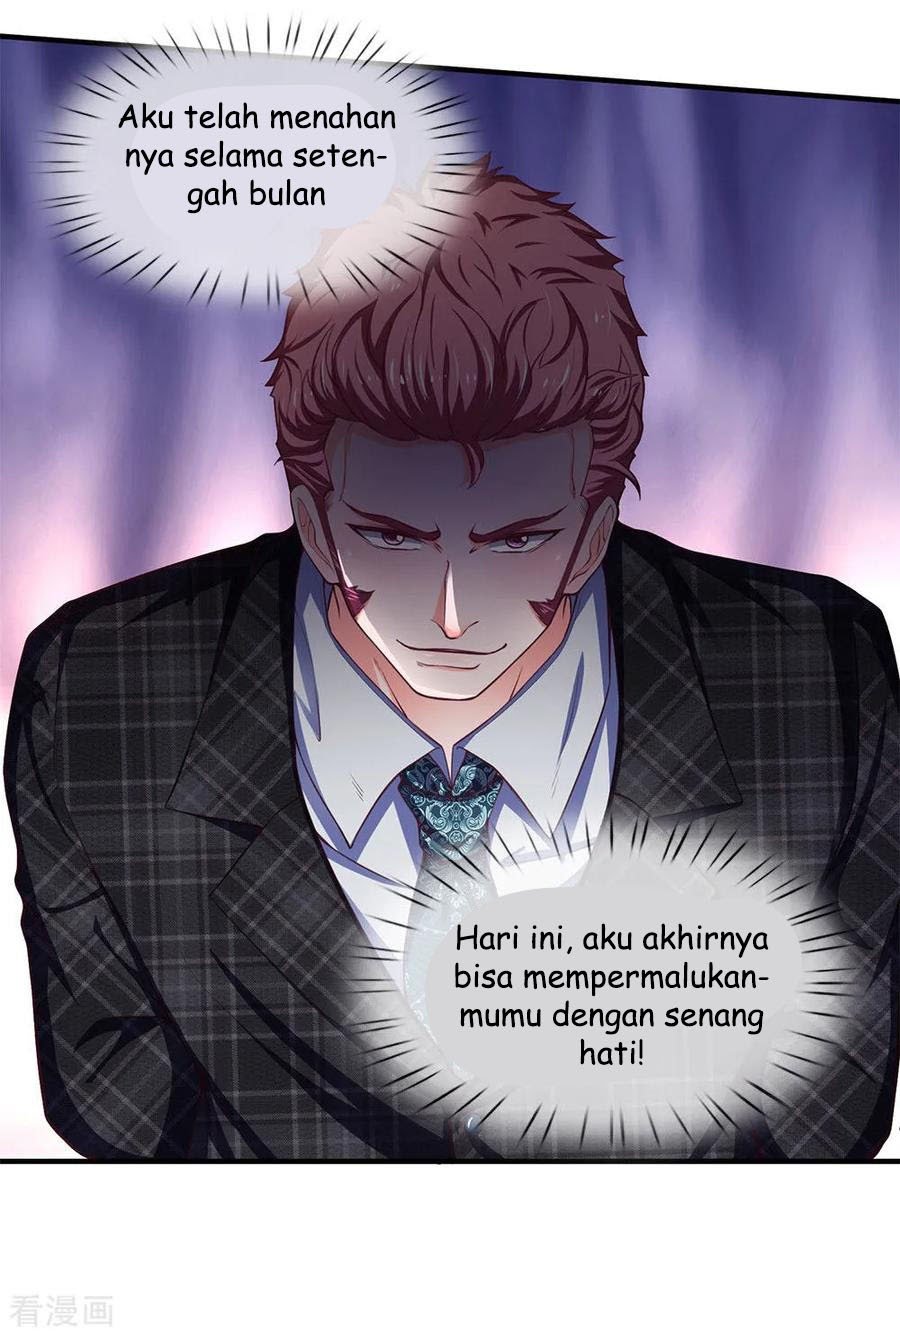 Ultimate King of Mixed City Chapter 104